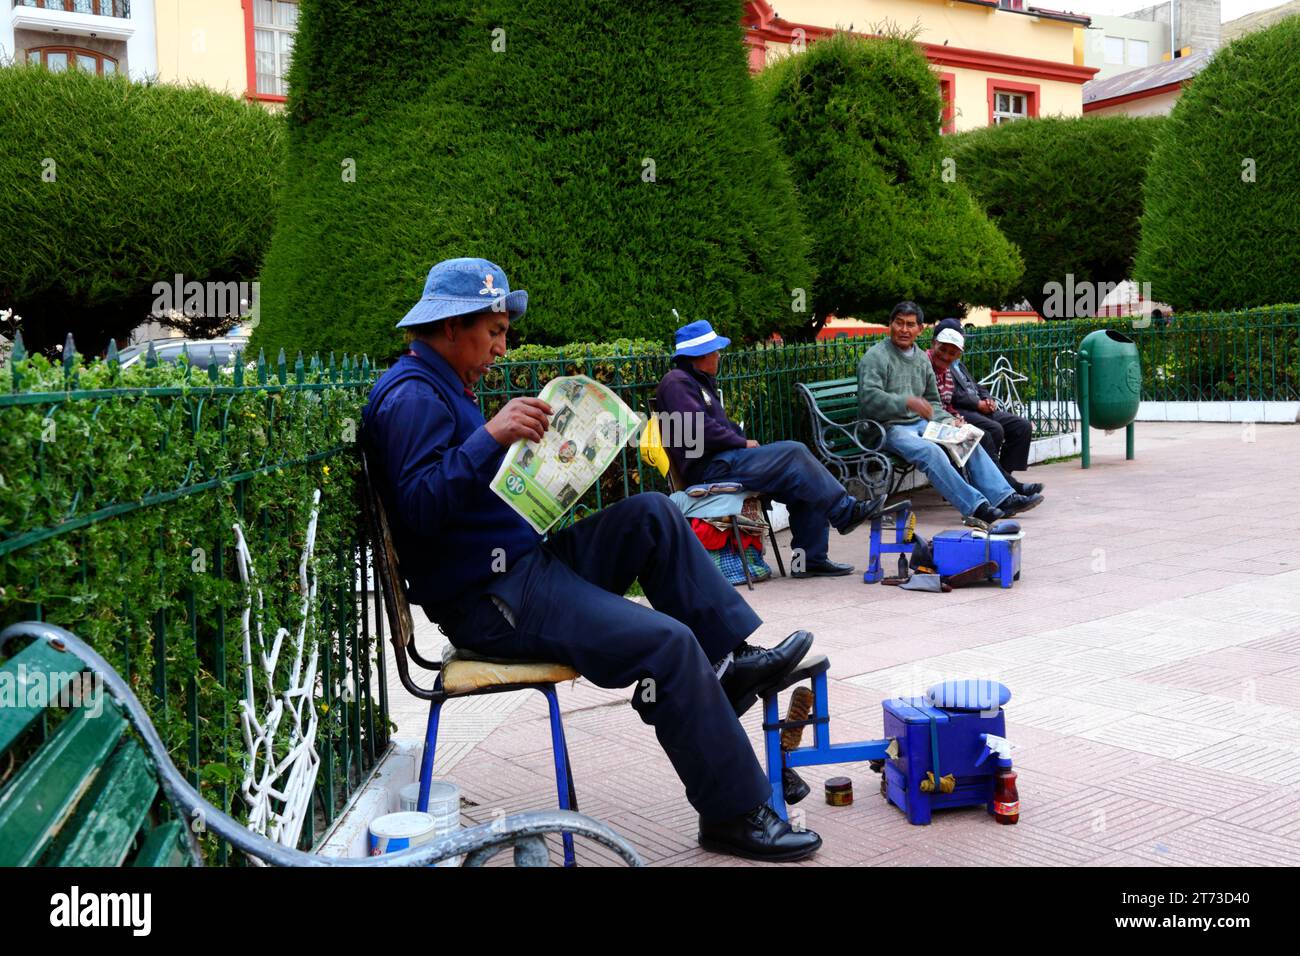 A shoe shiner reads a newspaper while waiting for business in the Plaza de Armas central square, Puno, Peru Stock Photo